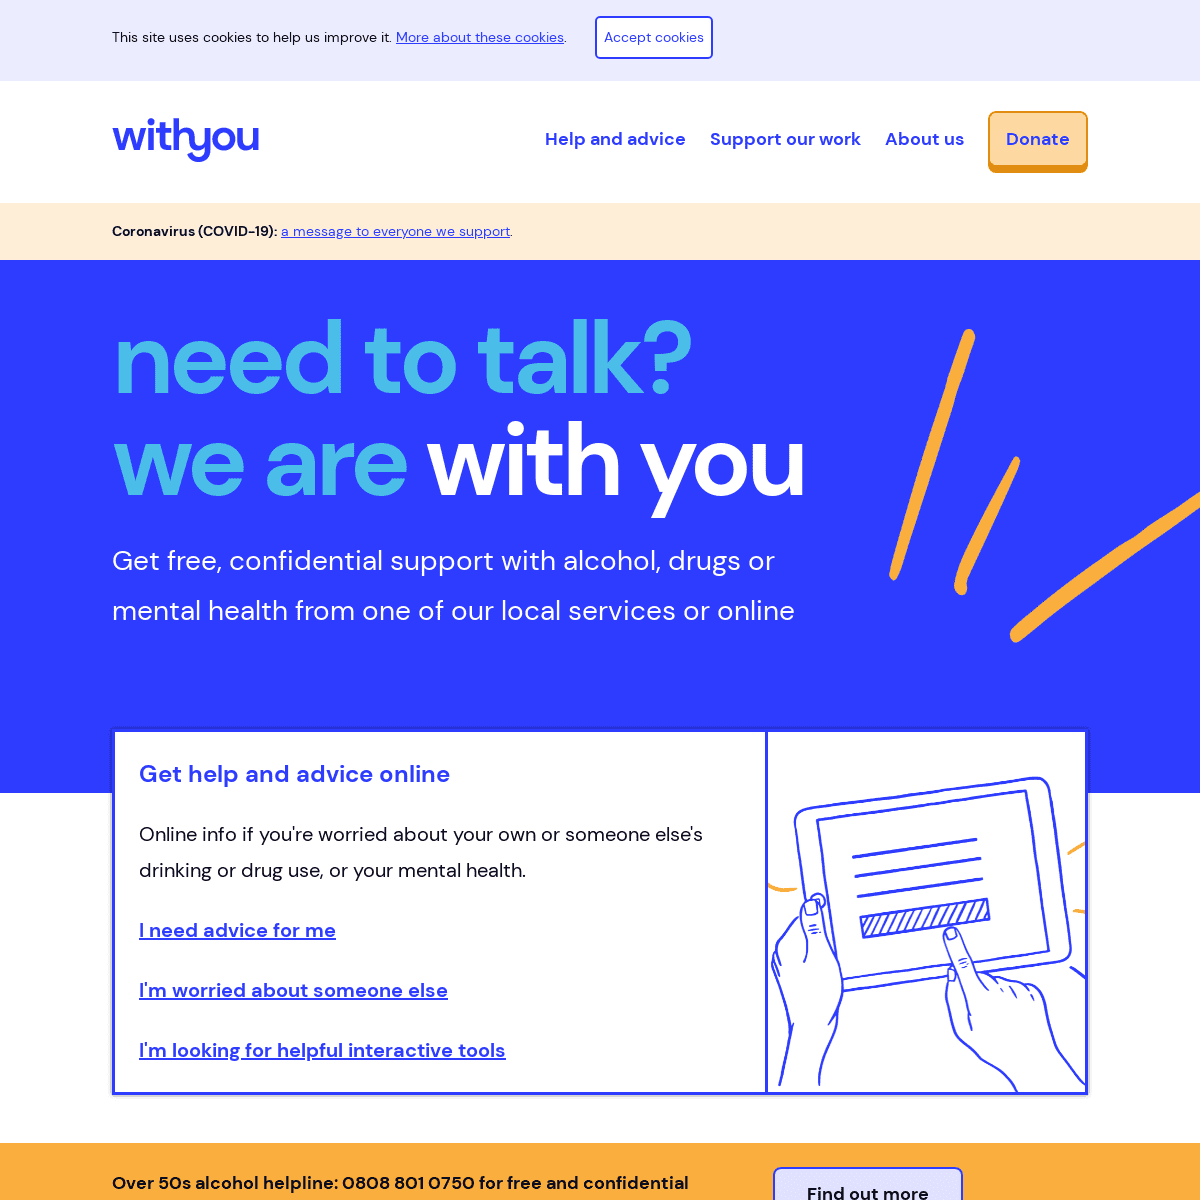 A complete backup of https://wearewithyou.org.uk